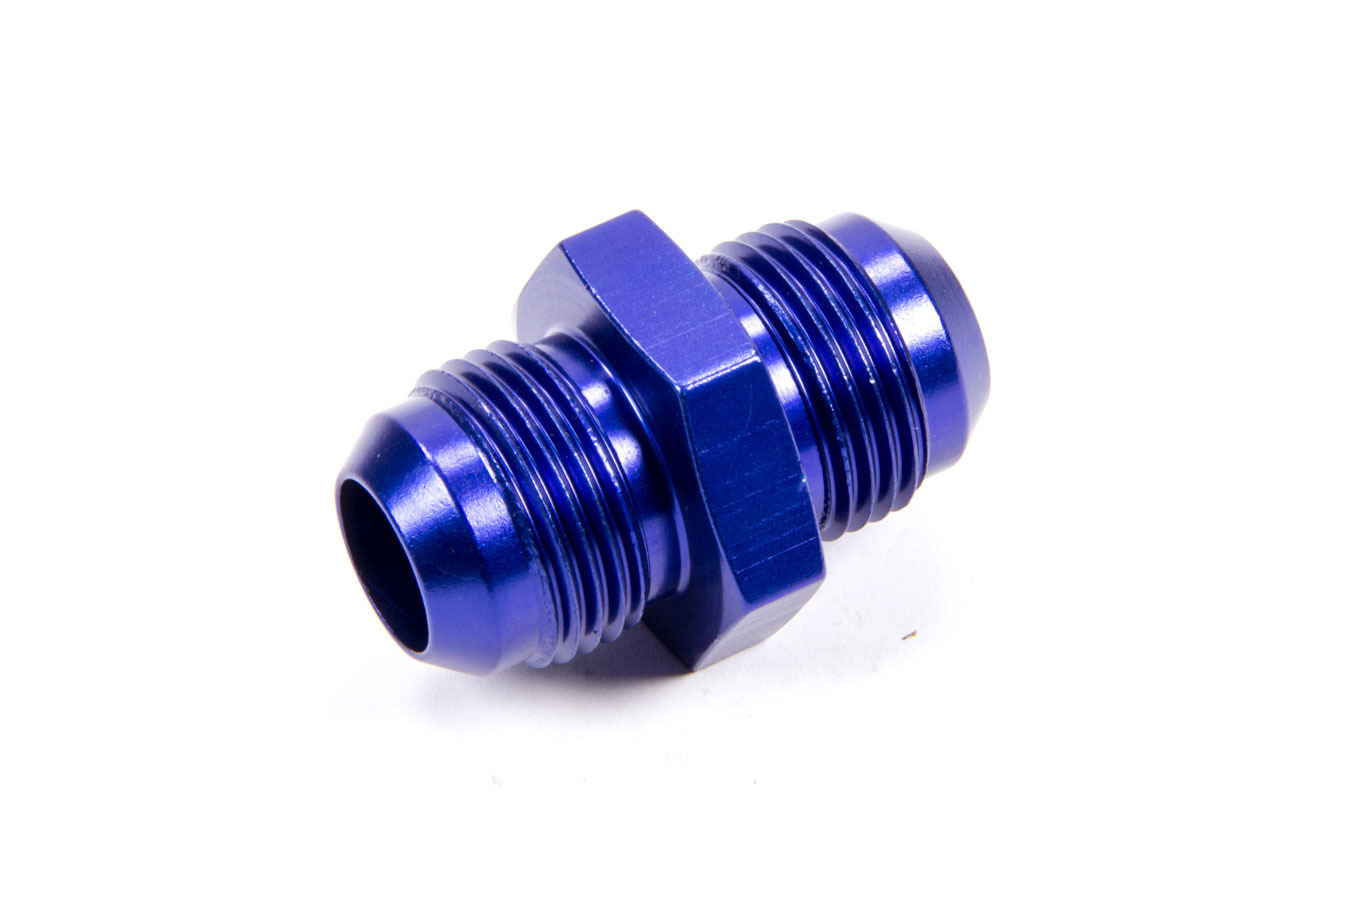 Fragola 481512 Fitting, Adapter, Straight, 12 AN Male to 12 AN Male, Aluminum, Blue Anodized, Each